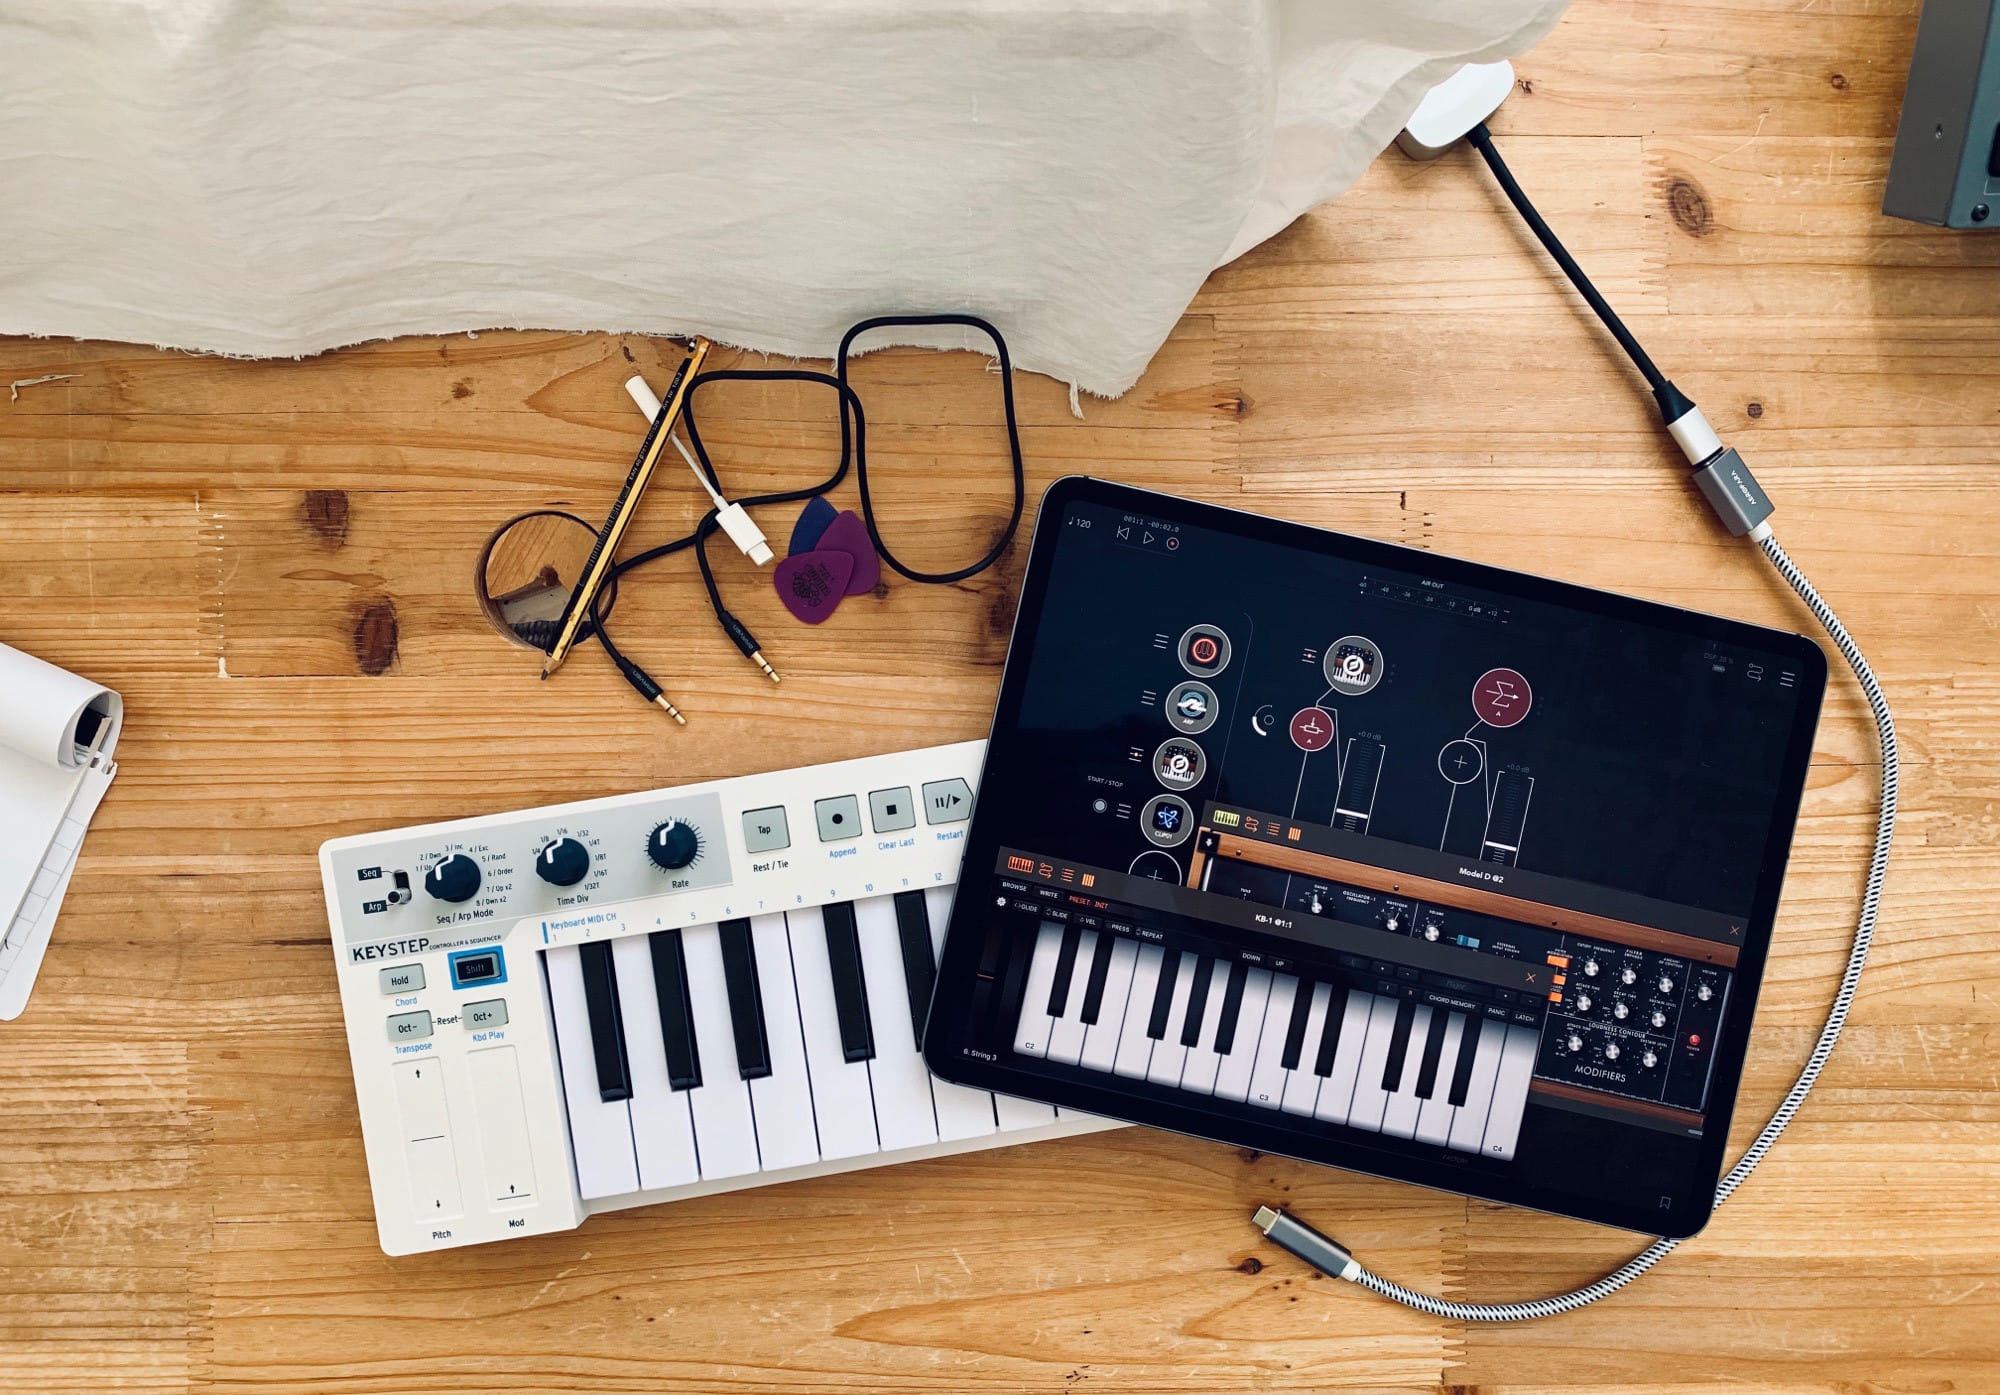 Good luck using the iPad Pro for making music.